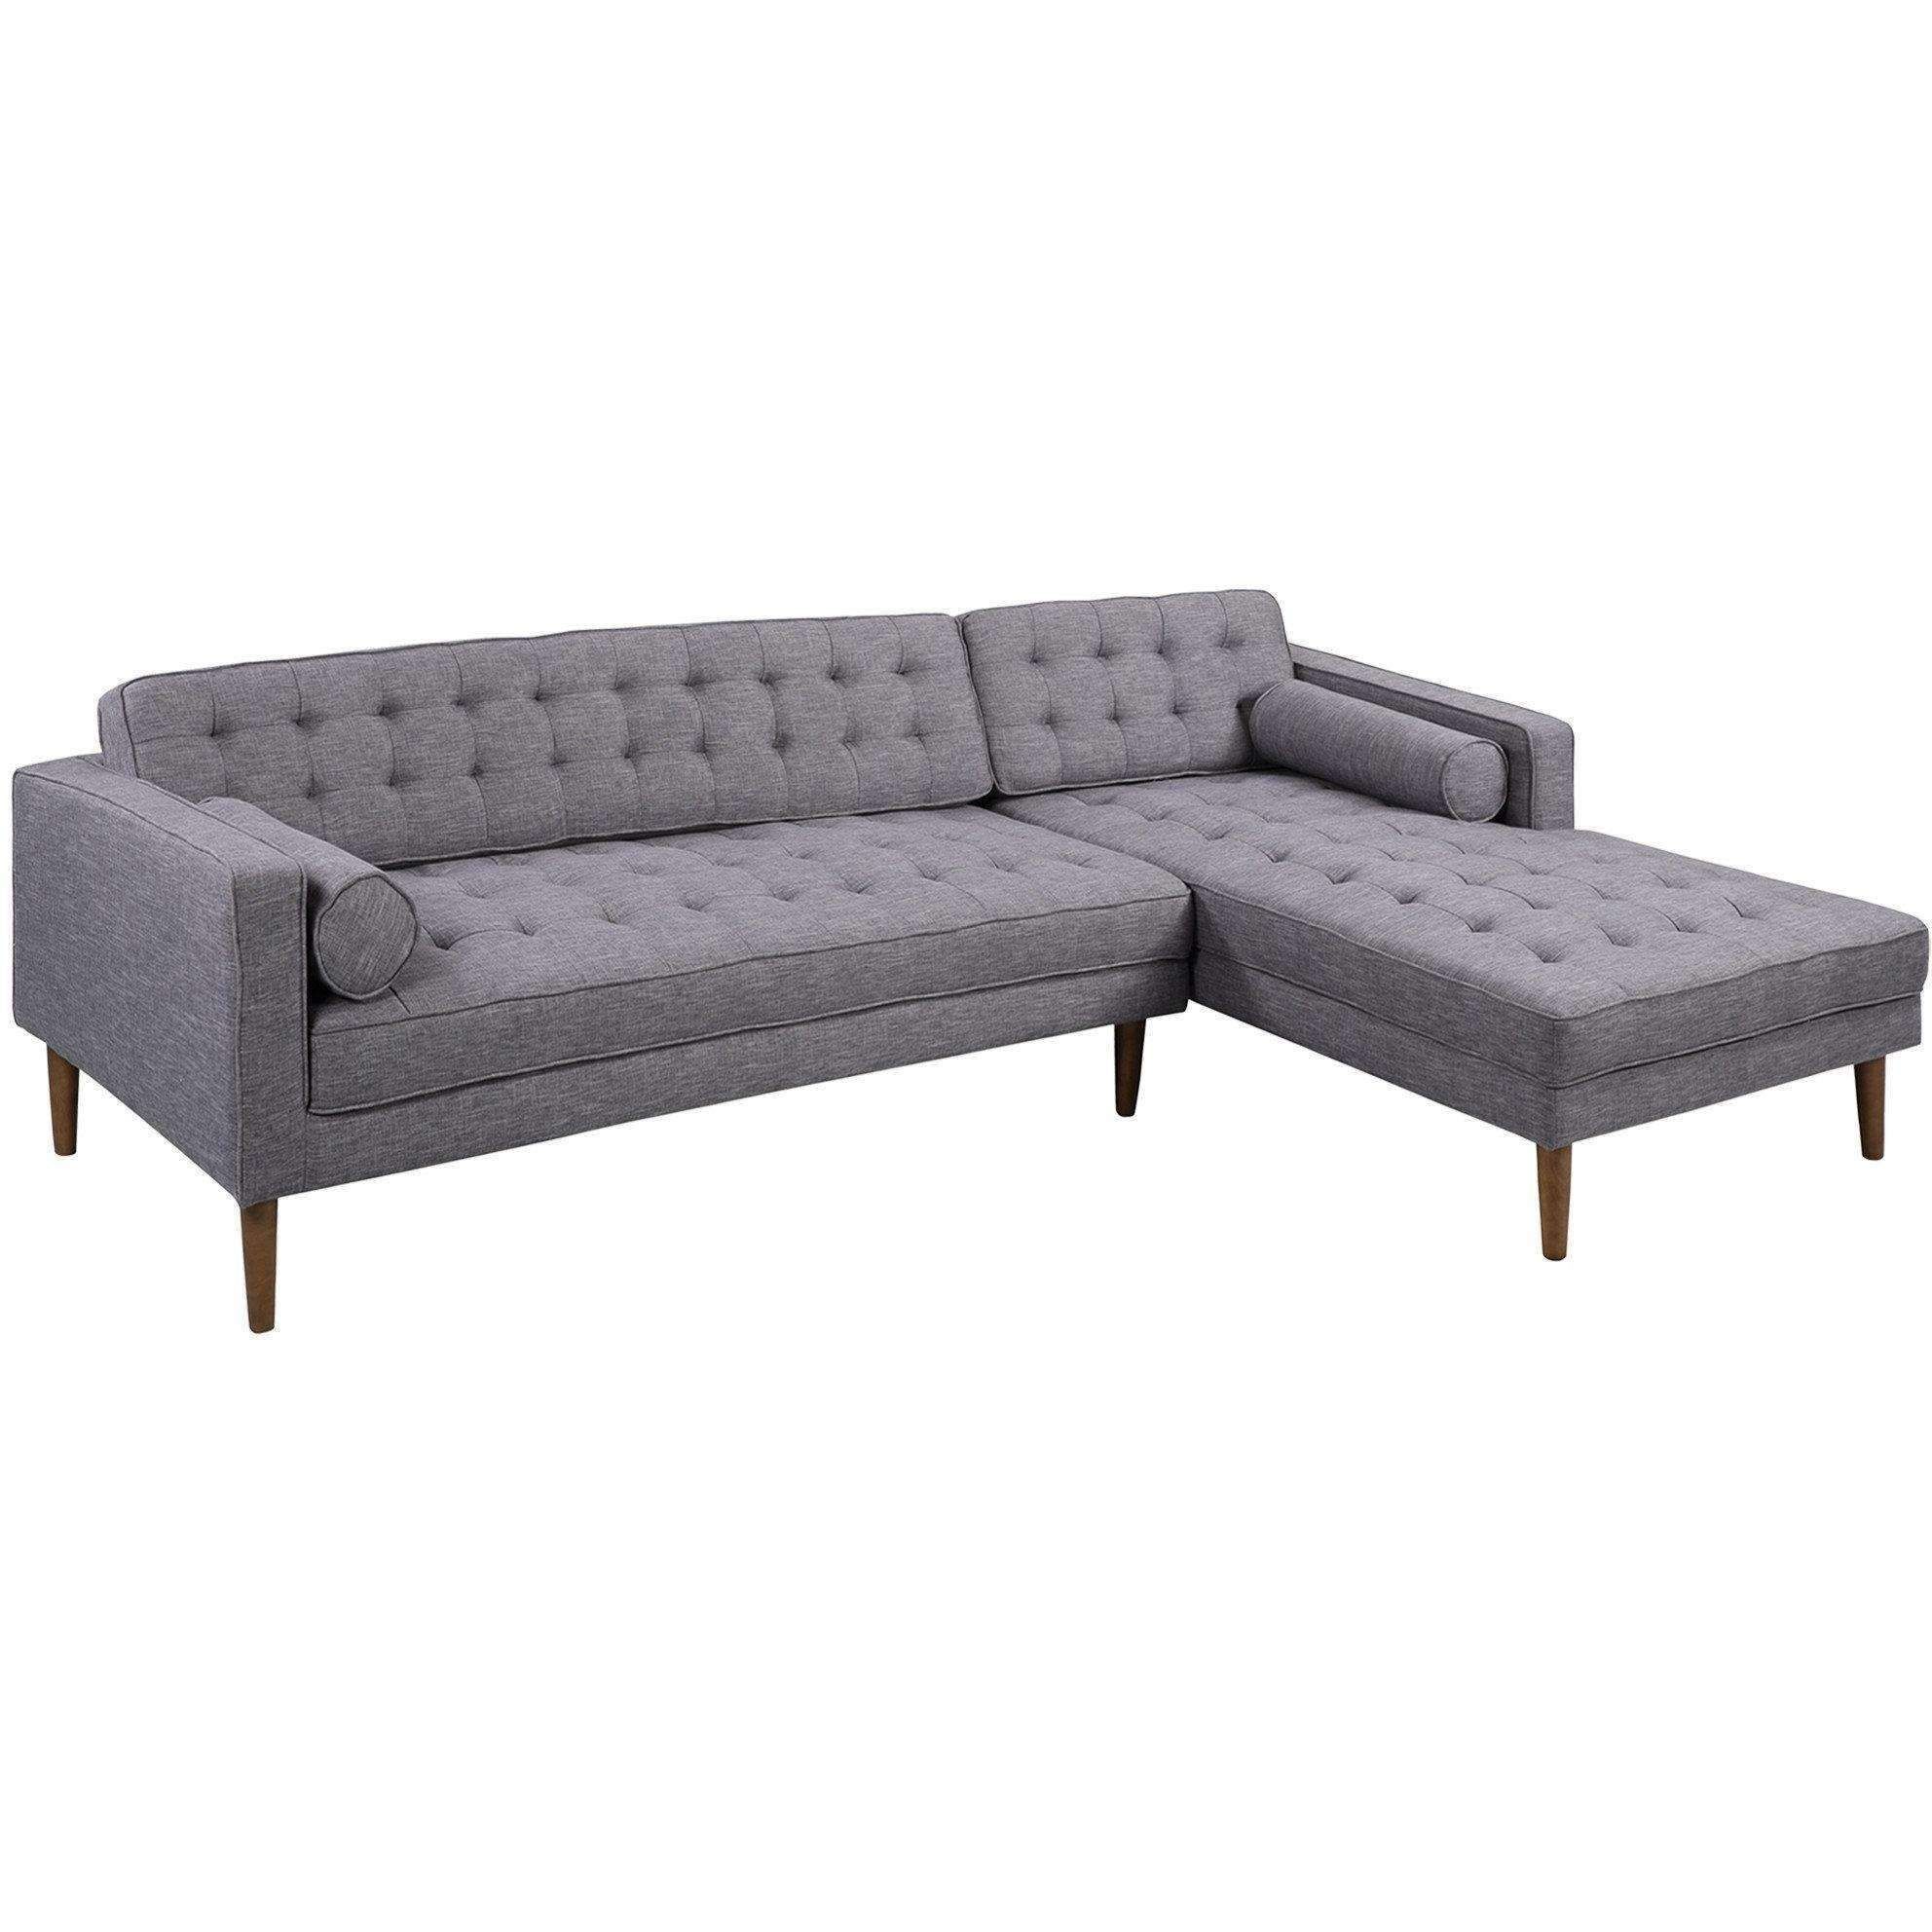 Armen Living Element Right Side Chaise Sectional In Dark Inside Element Left Side Chaise Sectional Sofas In Dark Gray Linen And Walnut Legs (View 4 of 15)